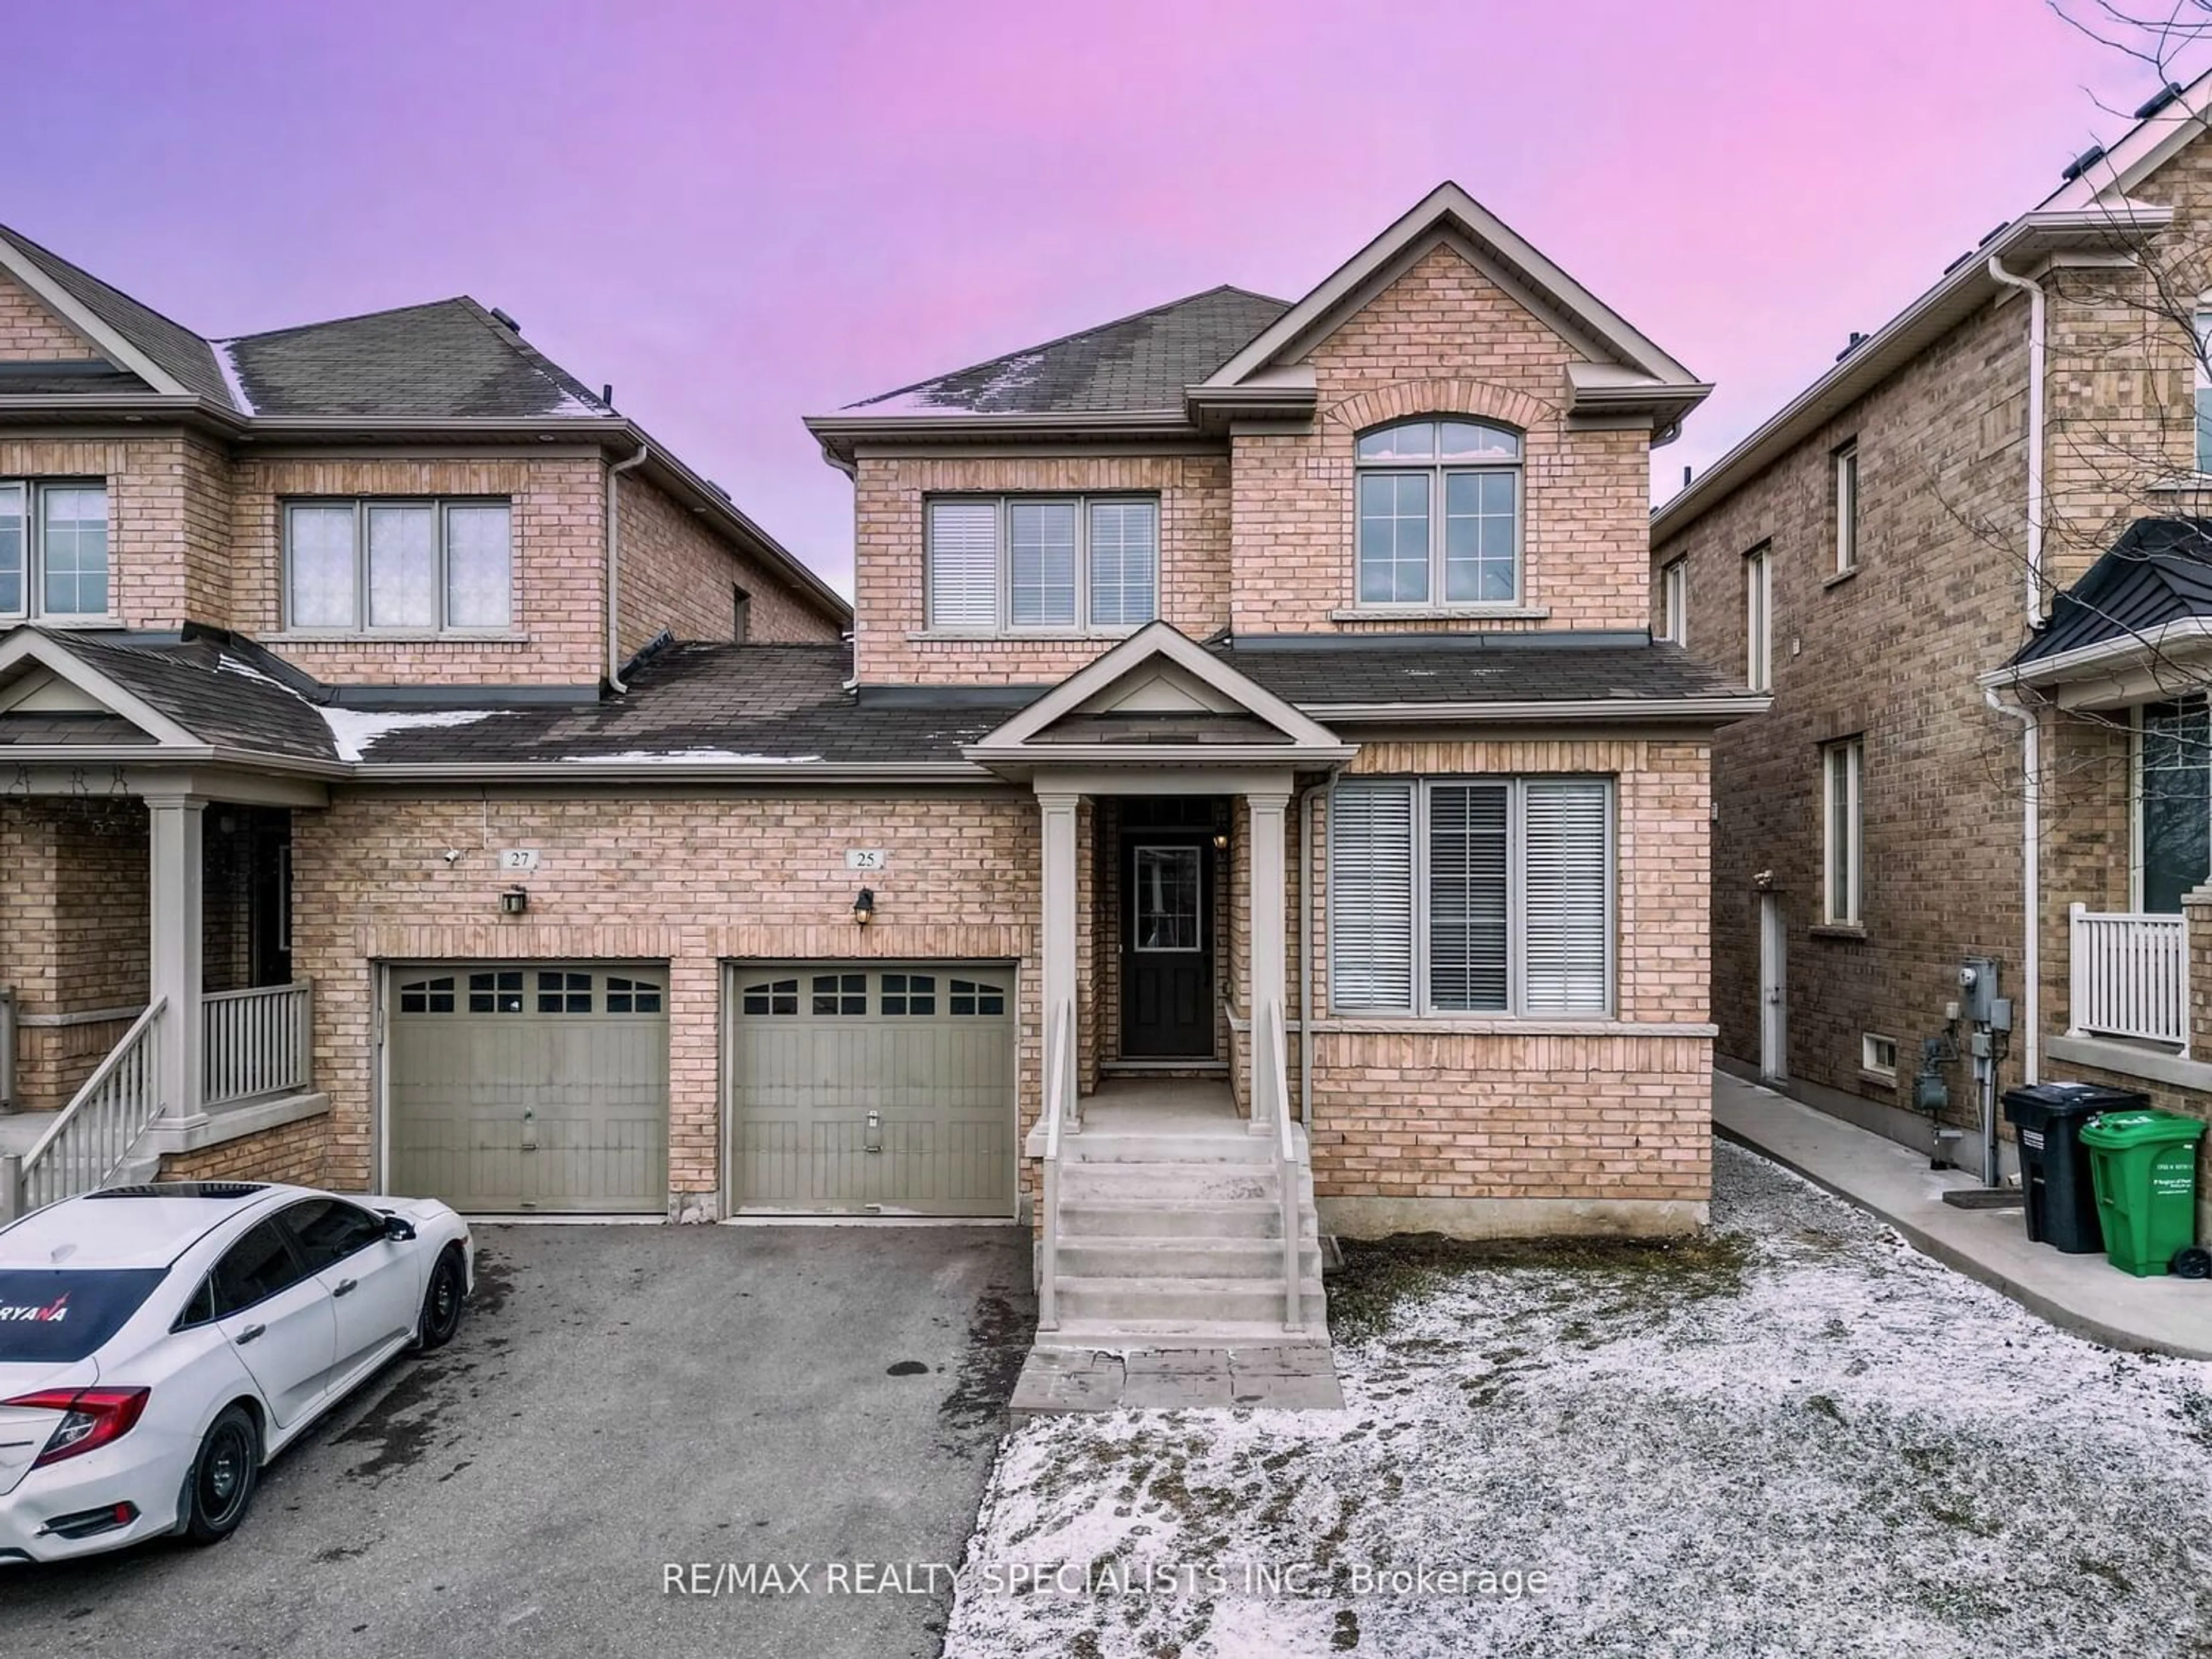 Frontside or backside of a home for 25 Chesterwood Cres, Brampton Ontario L6Y 0Z3